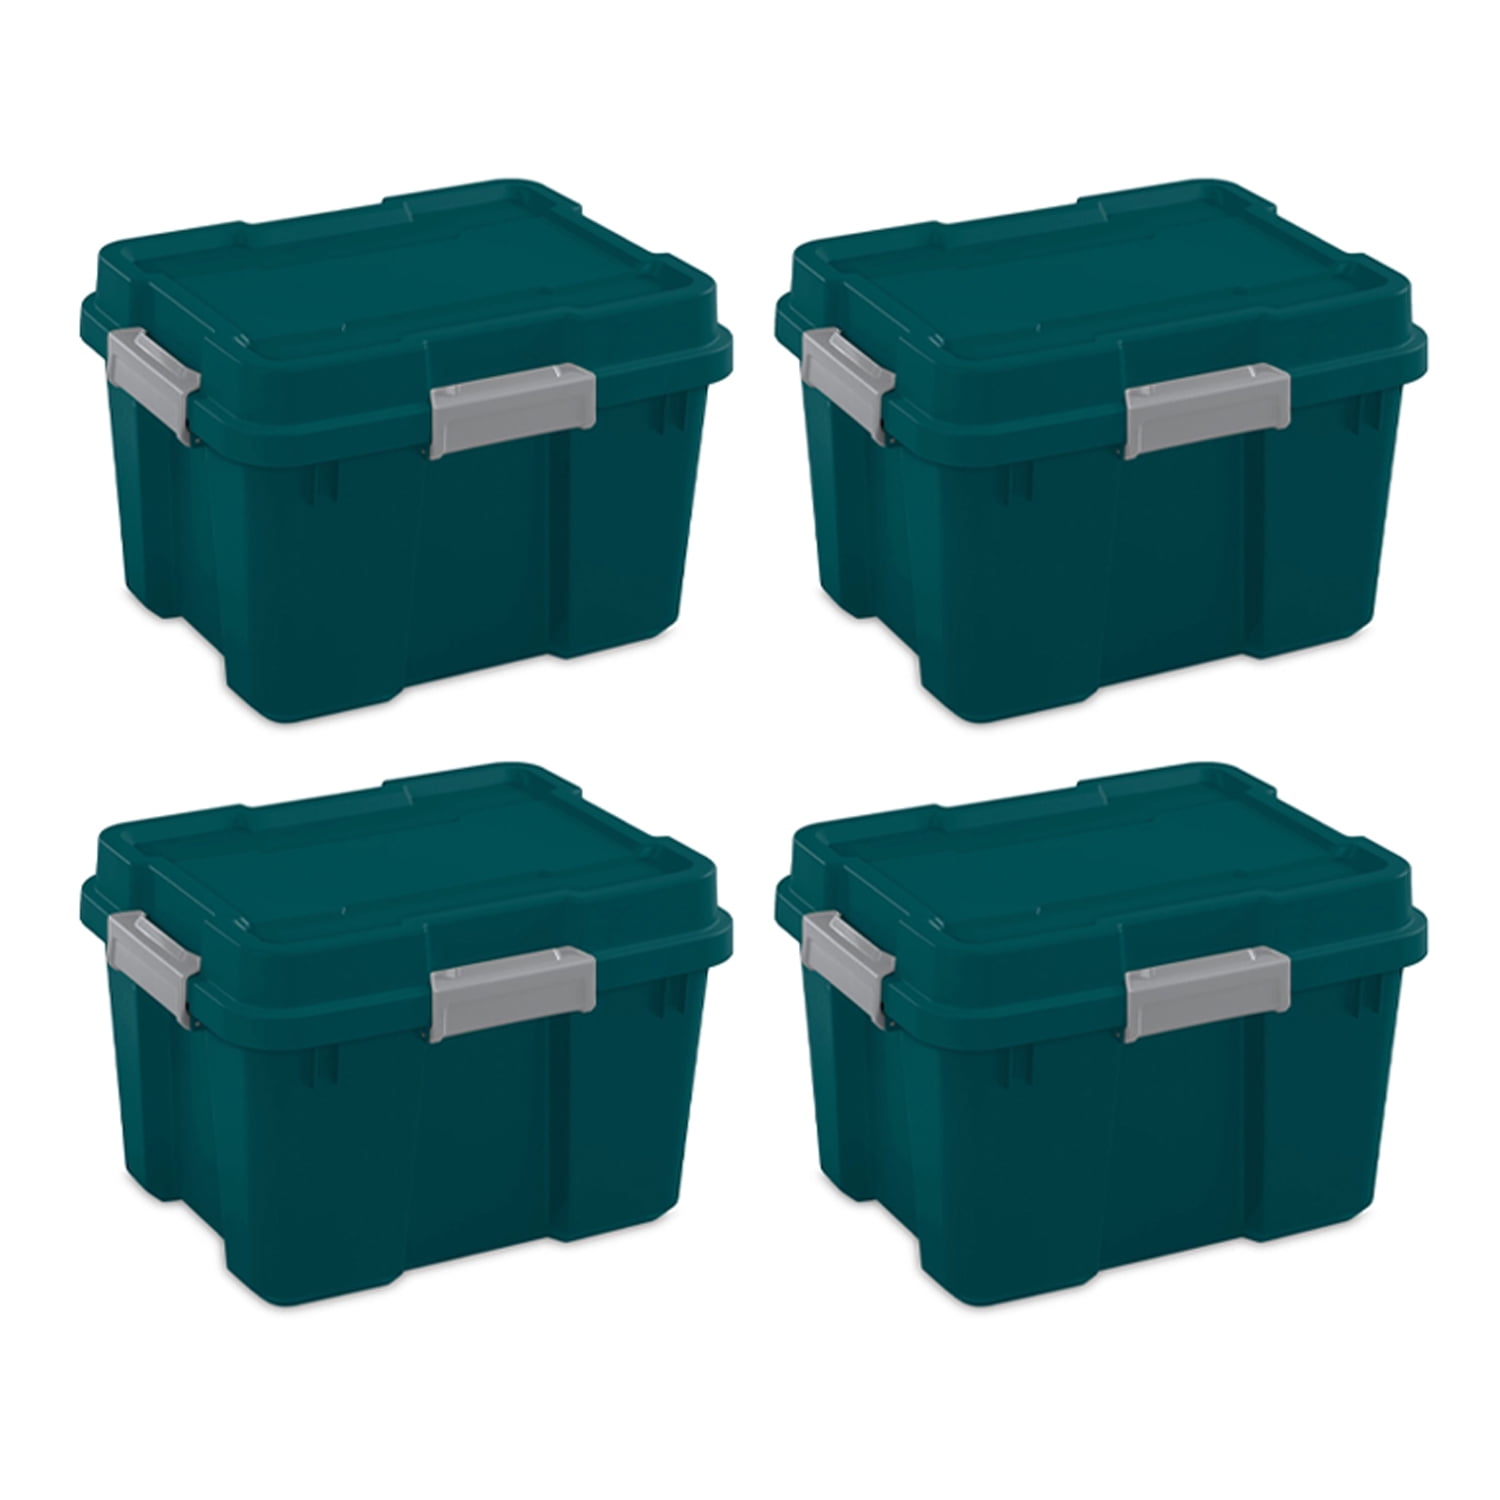 Sterilite 18319Y04 20 Gallon Plastic Storage Container Box with Lid 12 Pack